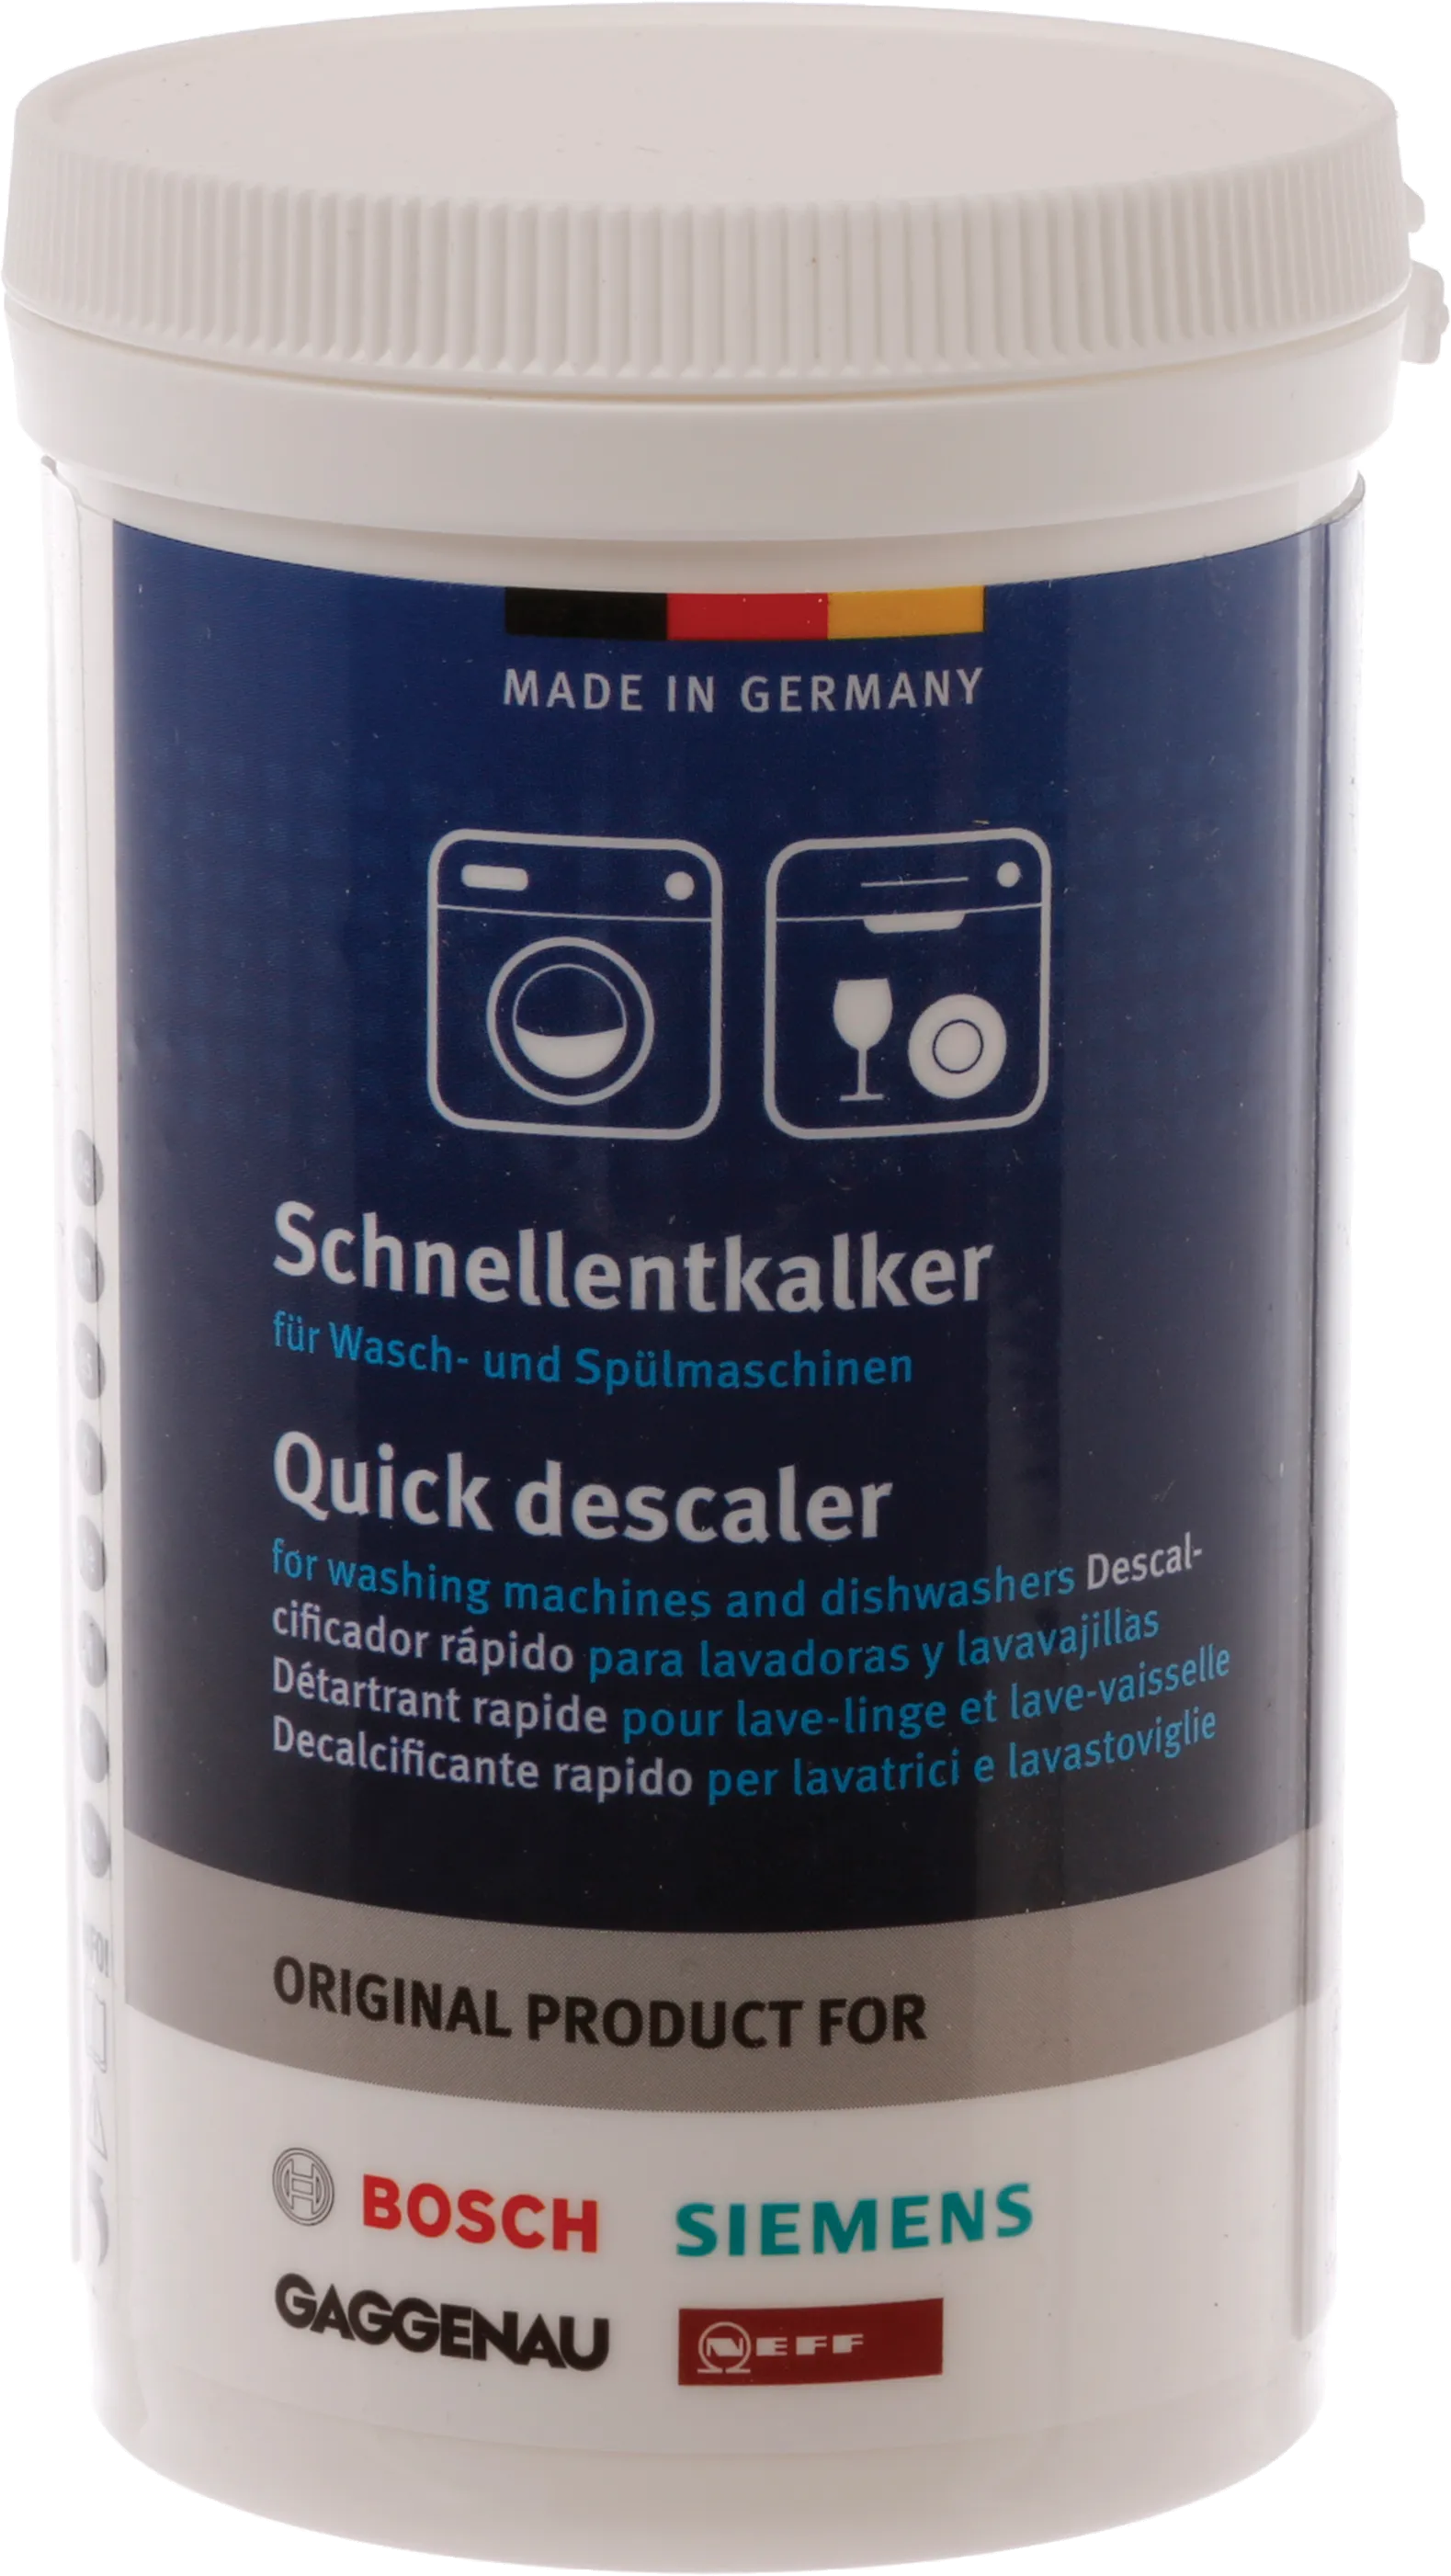 Quick descaler for washing machines and dishwashers 